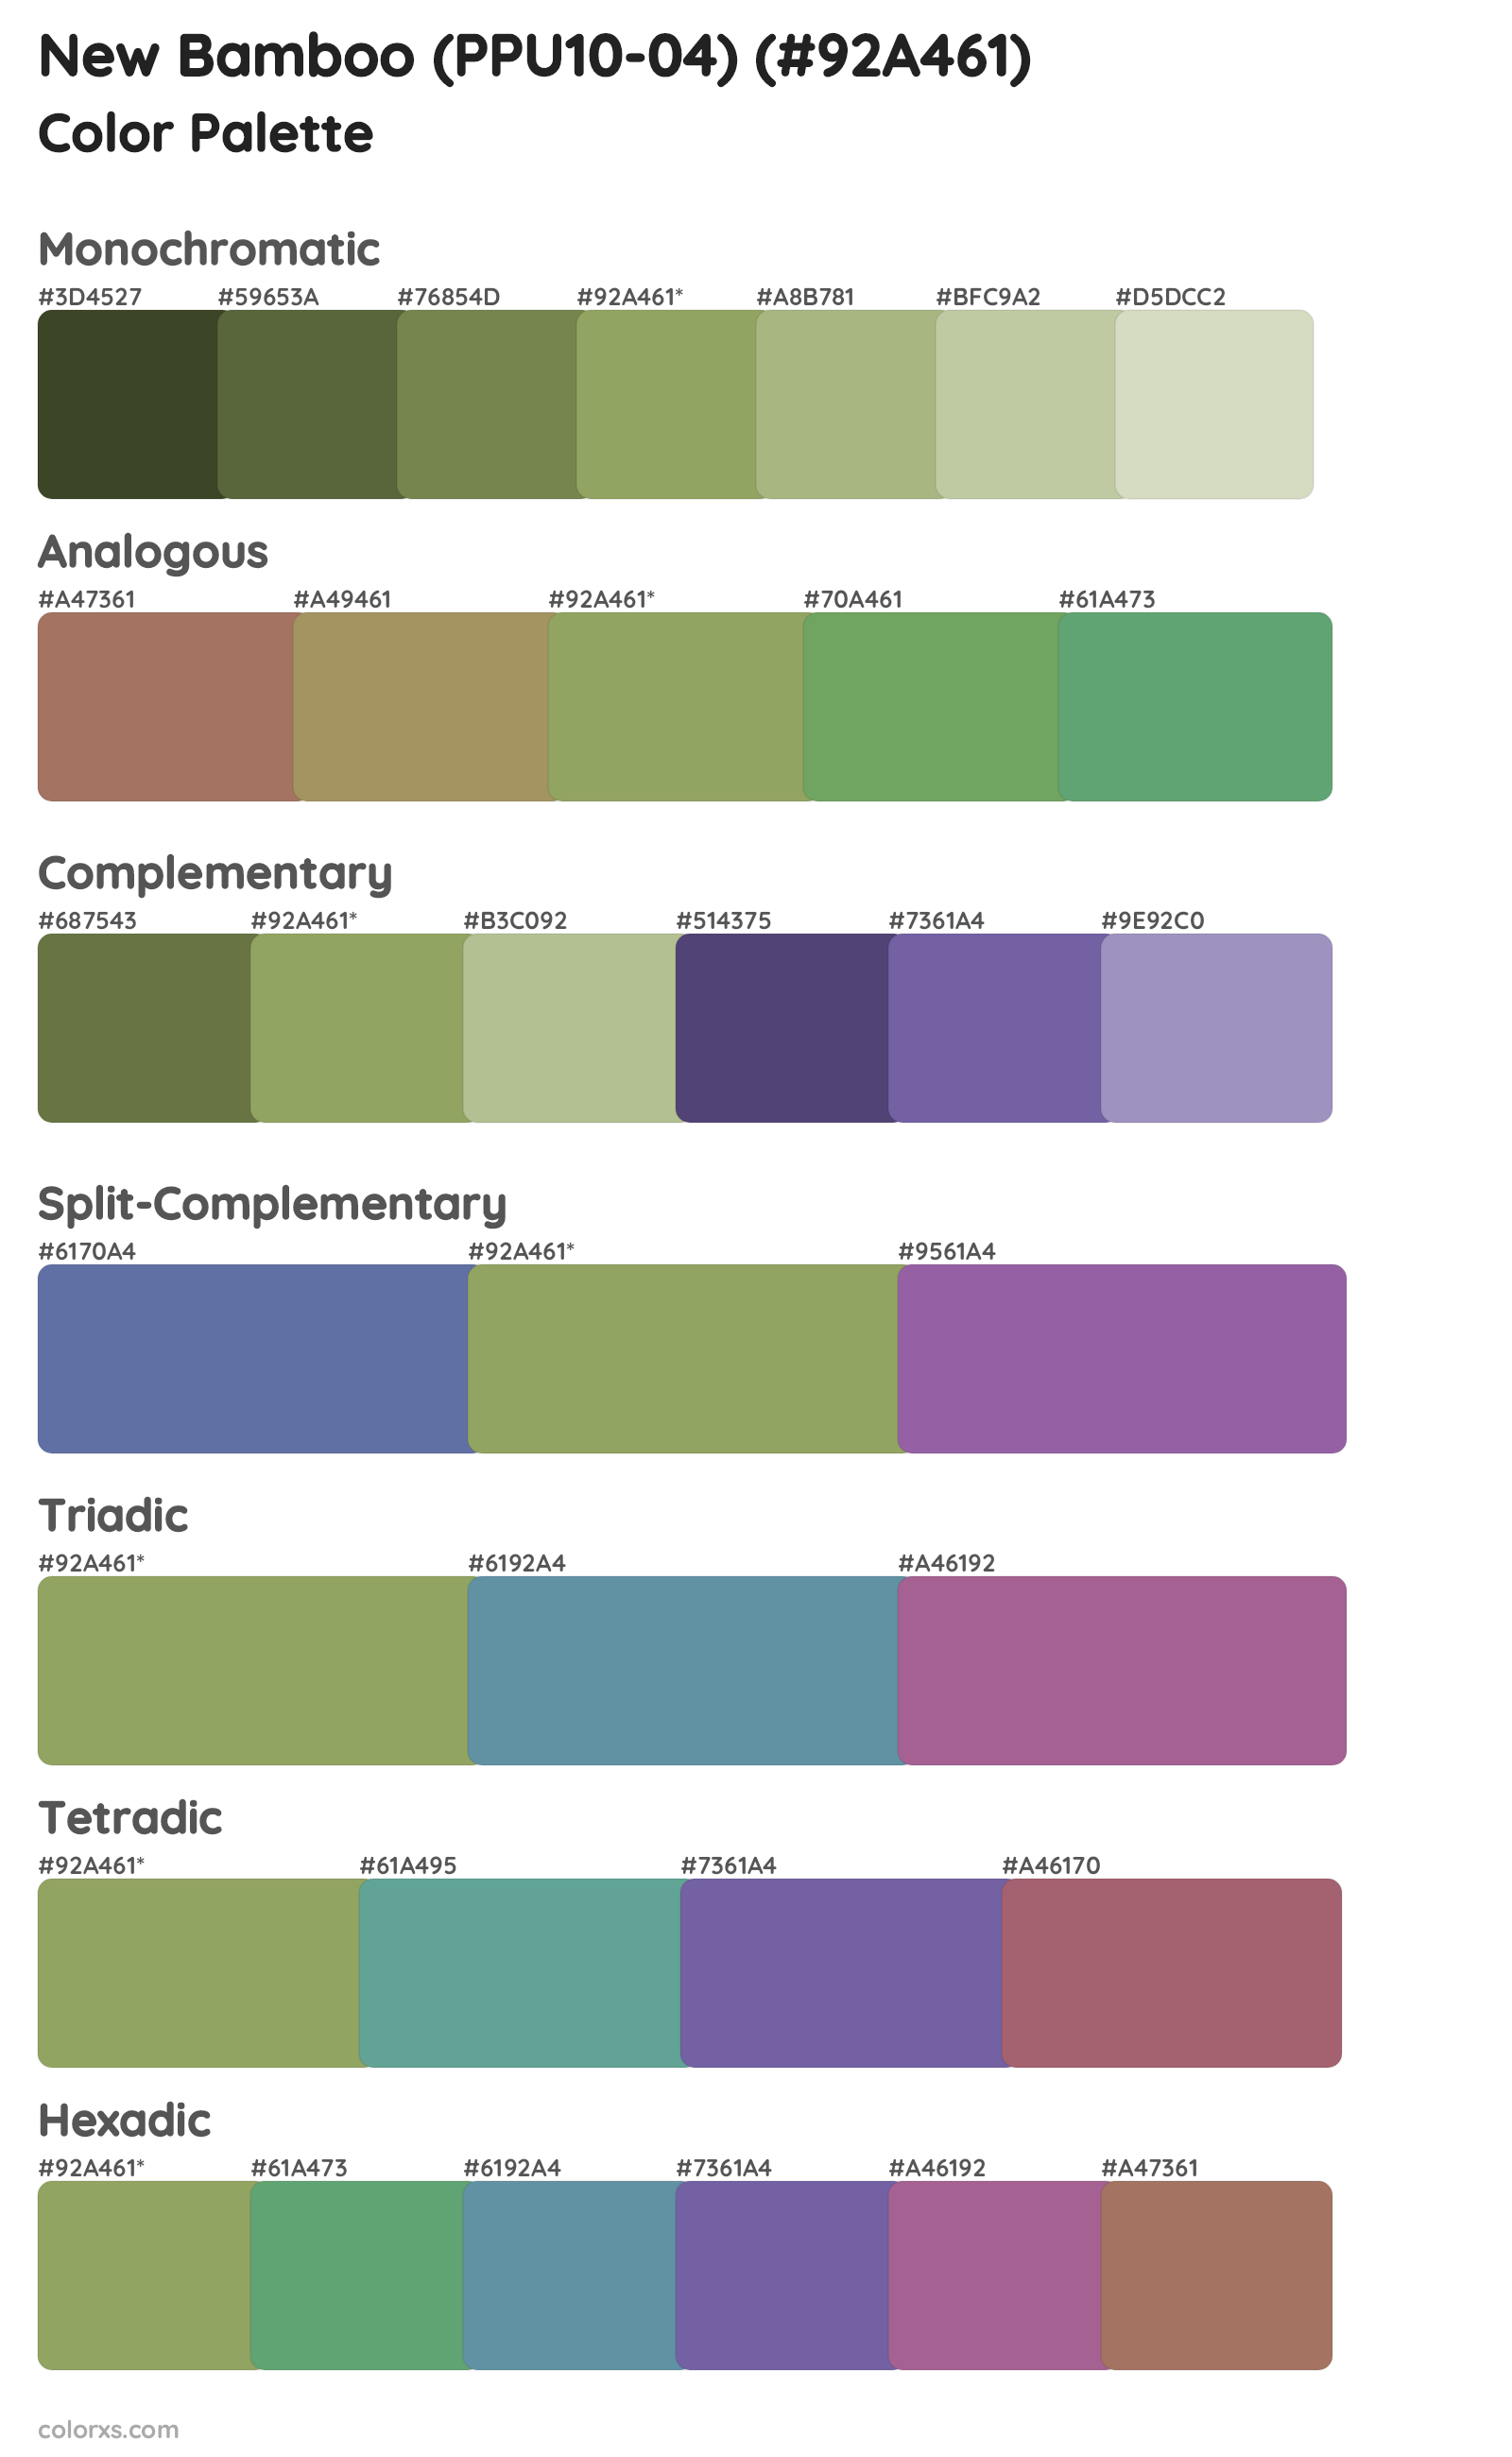 New Bamboo (PPU10-04) Color Scheme Palettes